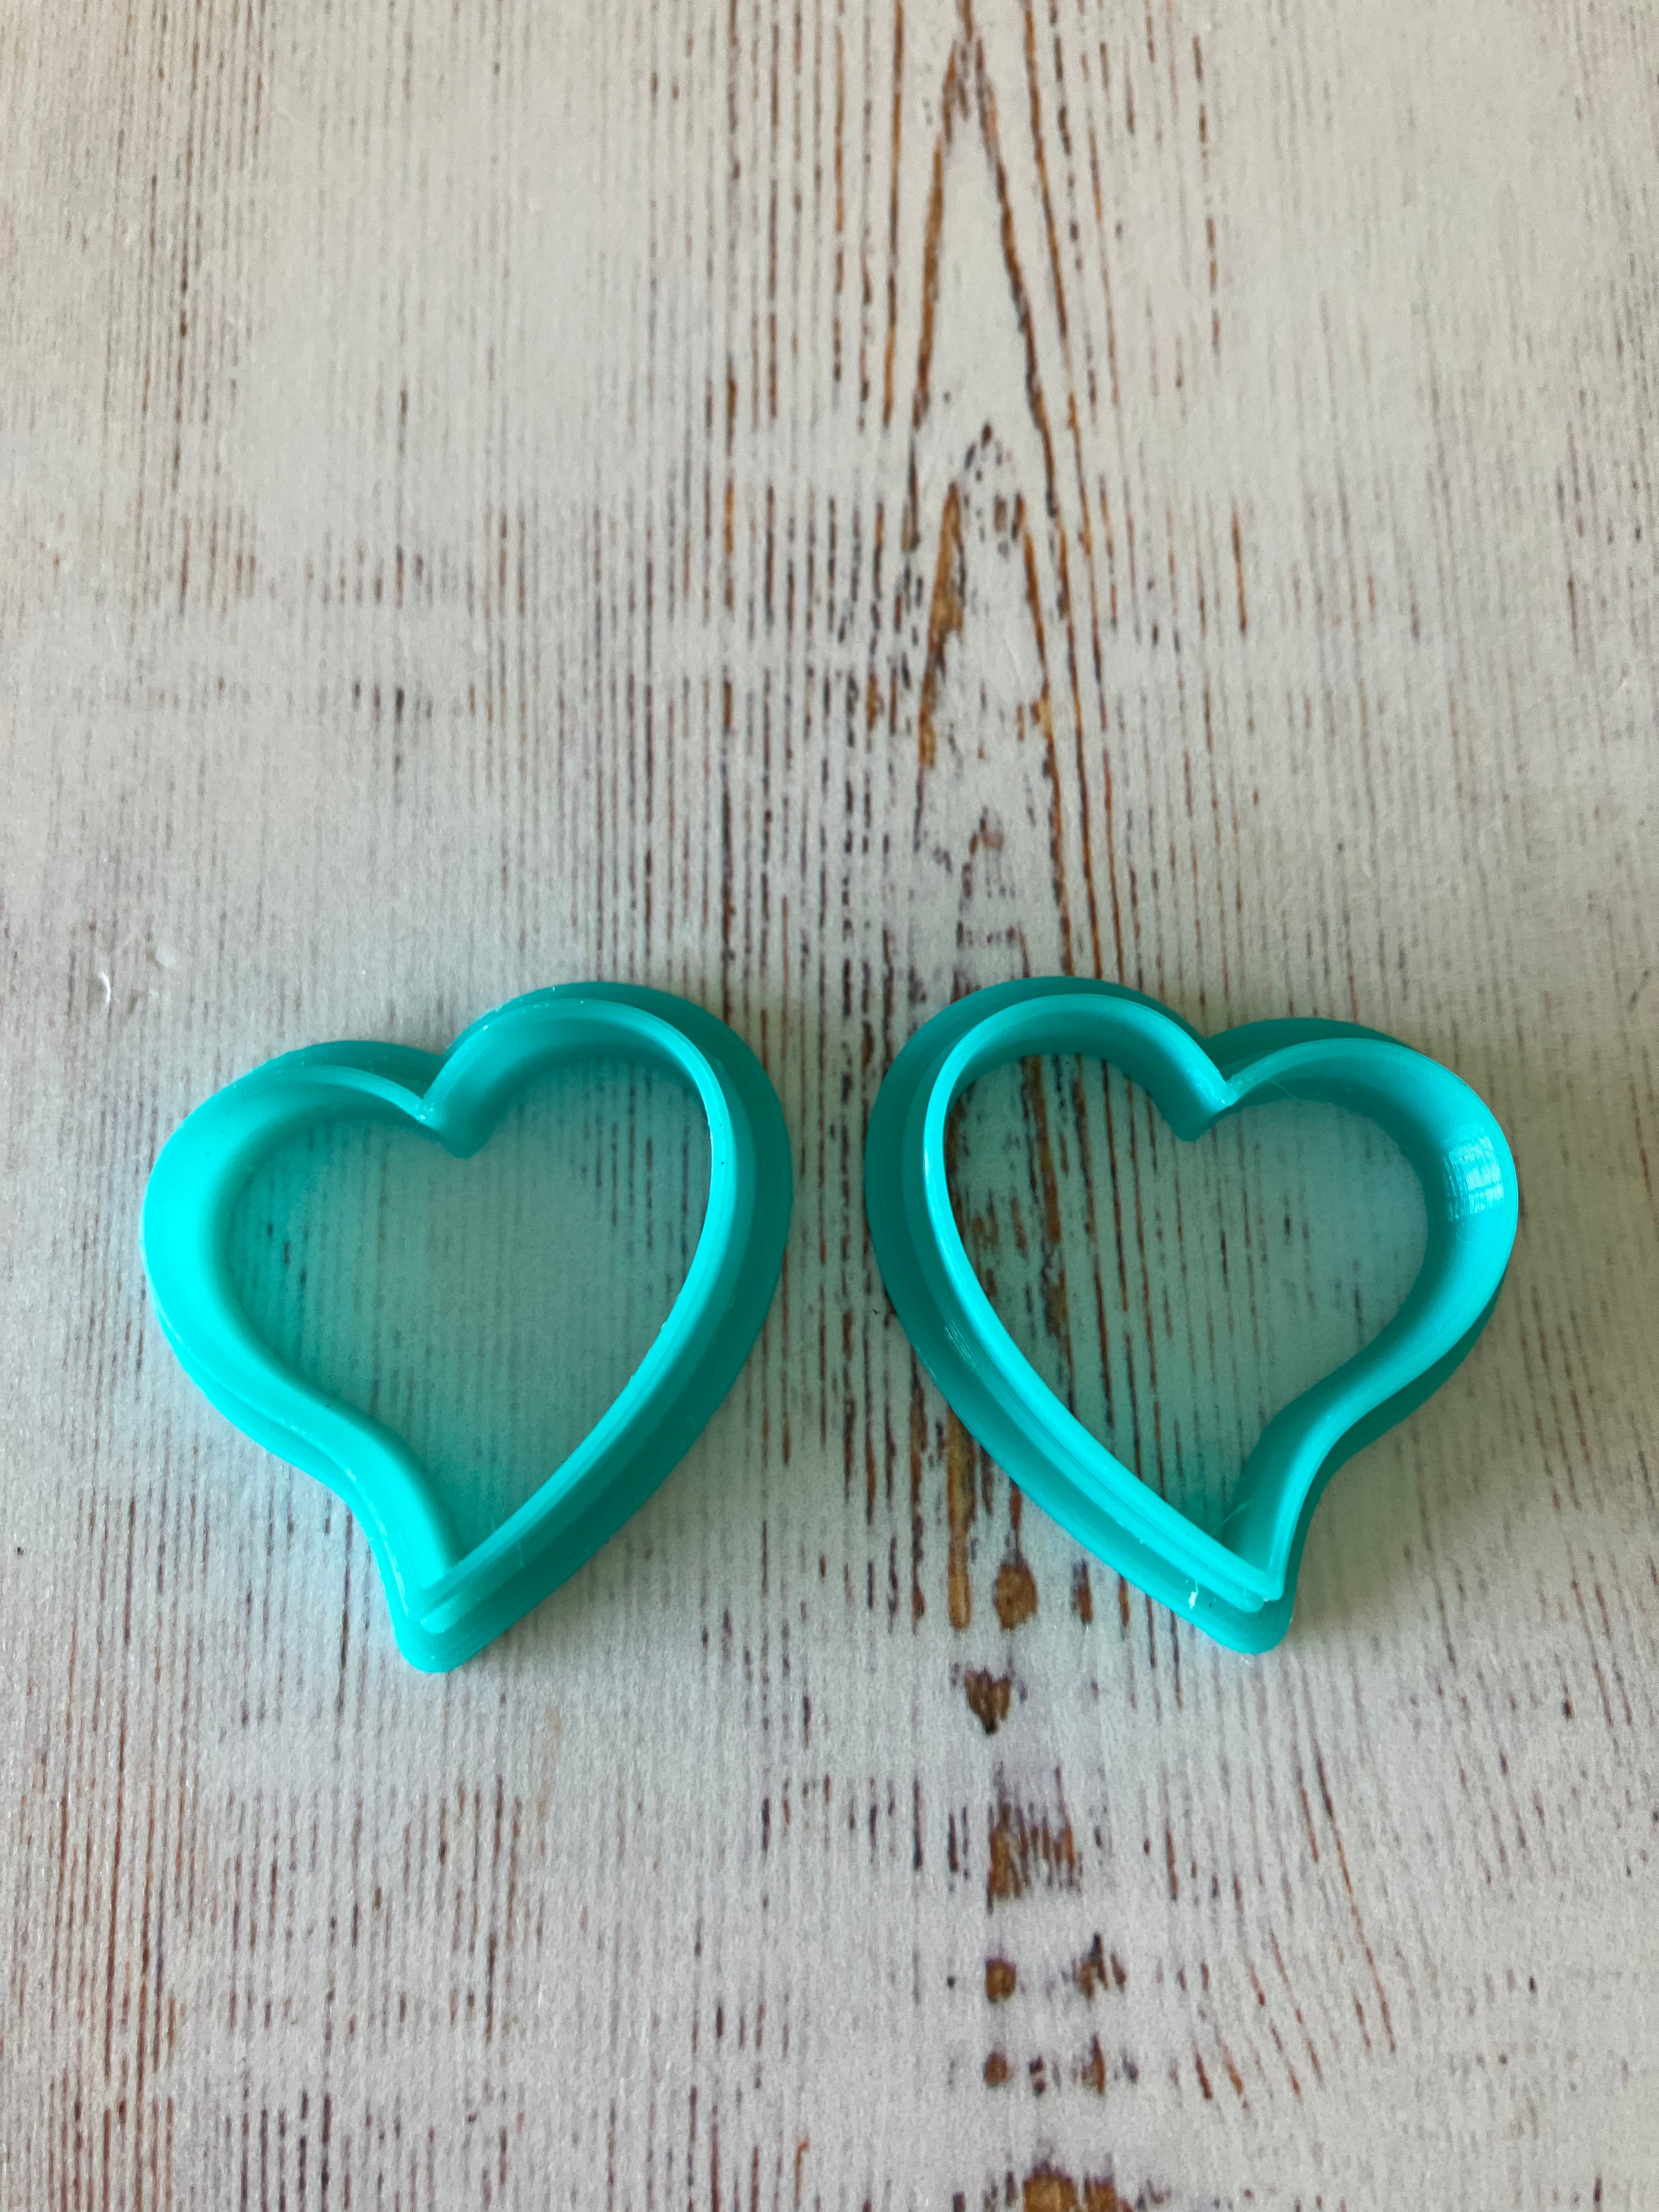 3D Gizmo's - Curved Hearts 25 MM (2 Cutters)